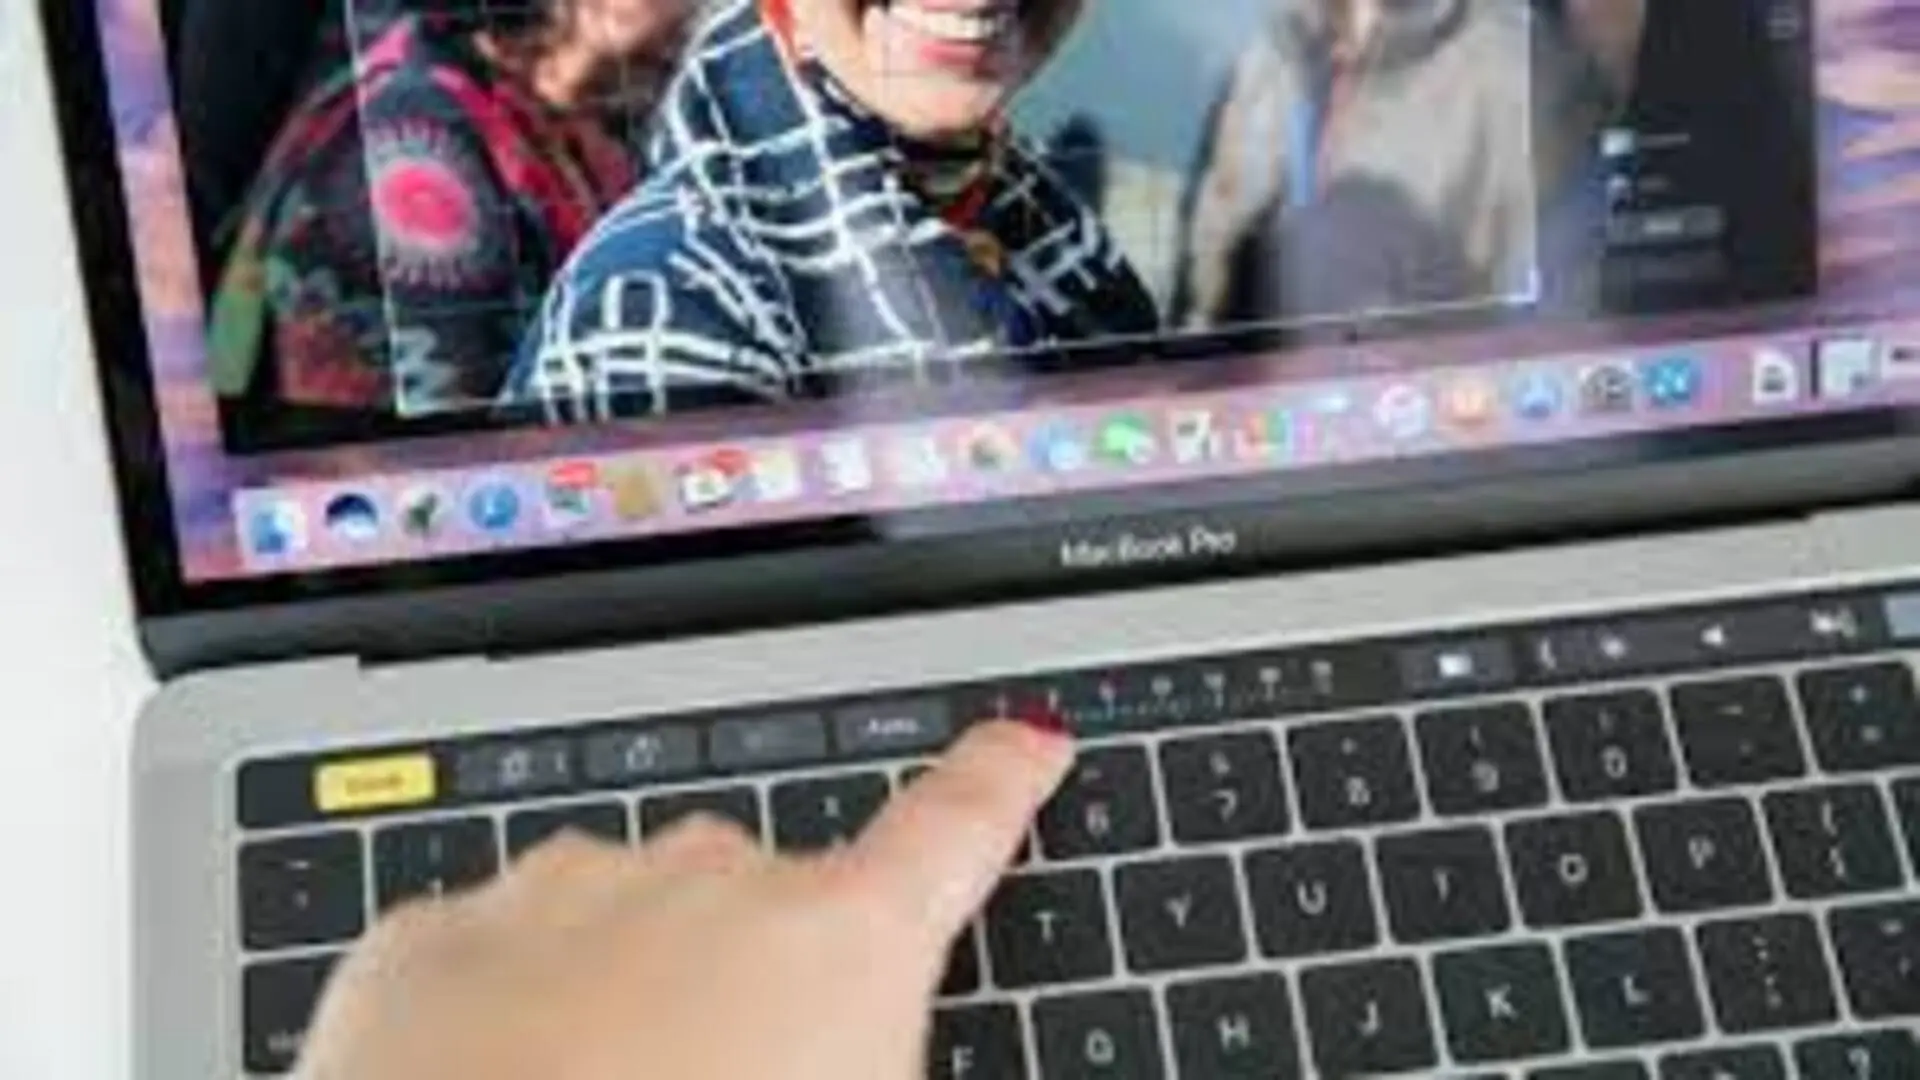 Microsoft Office beta testers will soon get MacBook Pro Touch Bar support